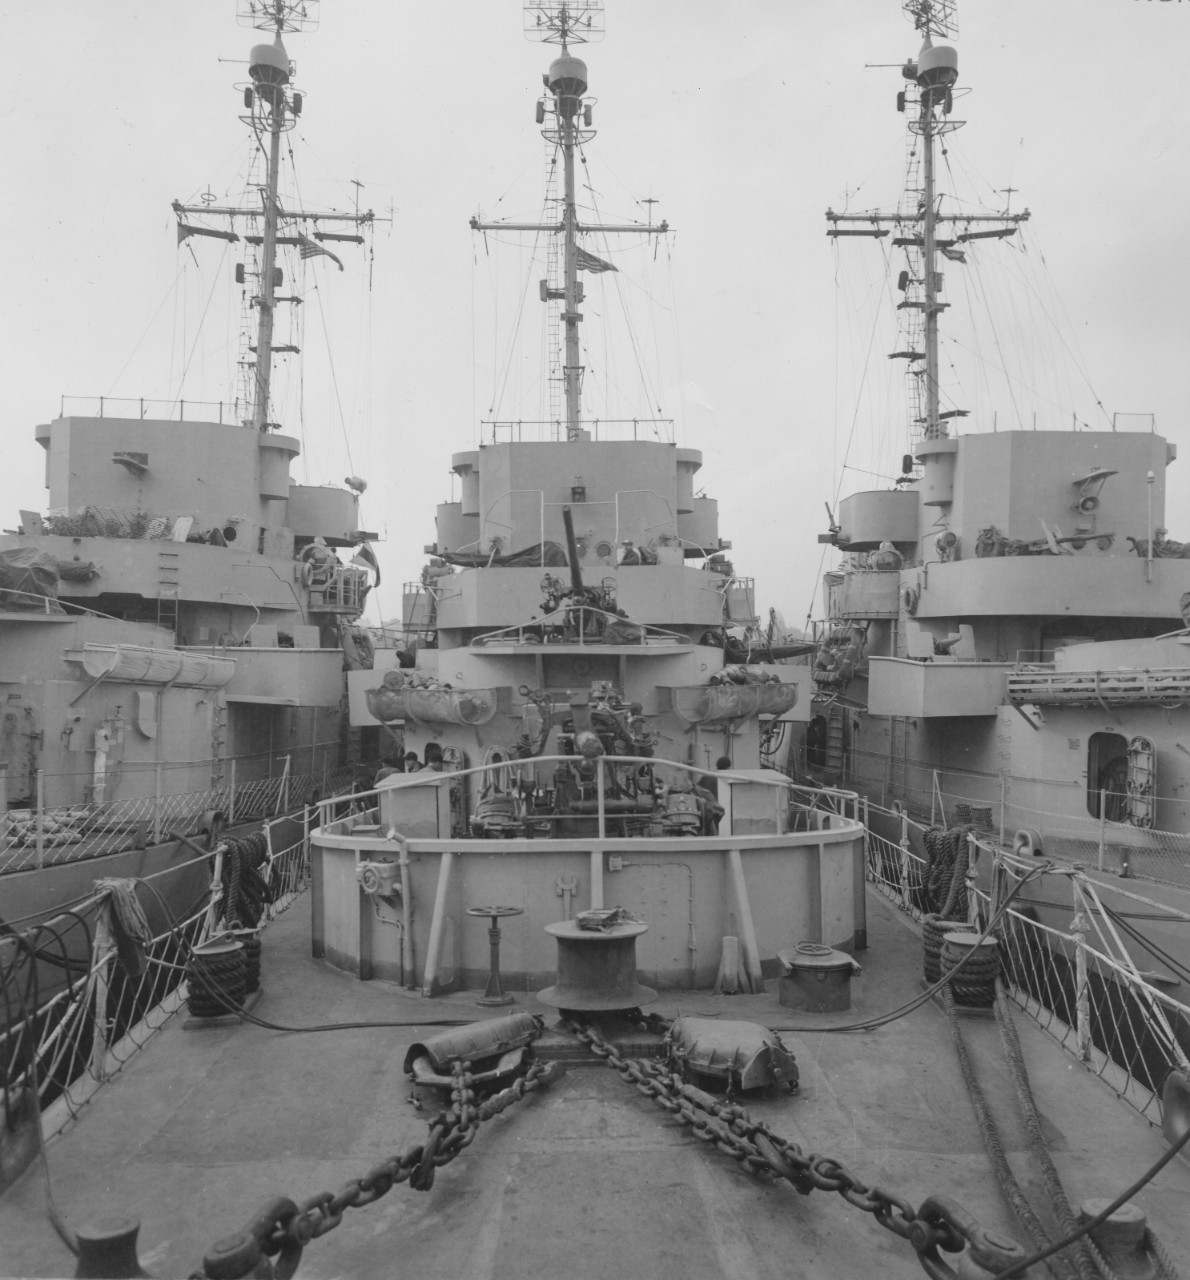 Standard practice with dock space at a premium, Fechteler (center), lies nested with two sister ships, New York Navy Yard, 31 March 1944. Looking aft from the foc’sle one sees the forward 3-inch/50 caliber dual-purpose guns (Mt. 31 and Mt. 32), with the Mk. 10 depth projector sited out of sight on the main deck aft of Mt. 31. Note the guard rails to prevent gunners from firing into the ship forward of both main battery mounts, and the floater net baskets. Twenty-millimeter Oerlikon machine guns are visible on the same level as Mt. 32 and the next deck above. (U.S. Navy Bureau of Ships Photograph BS 65722, National Archives and Records Service, Still Pictures Division, College Park, Md.)